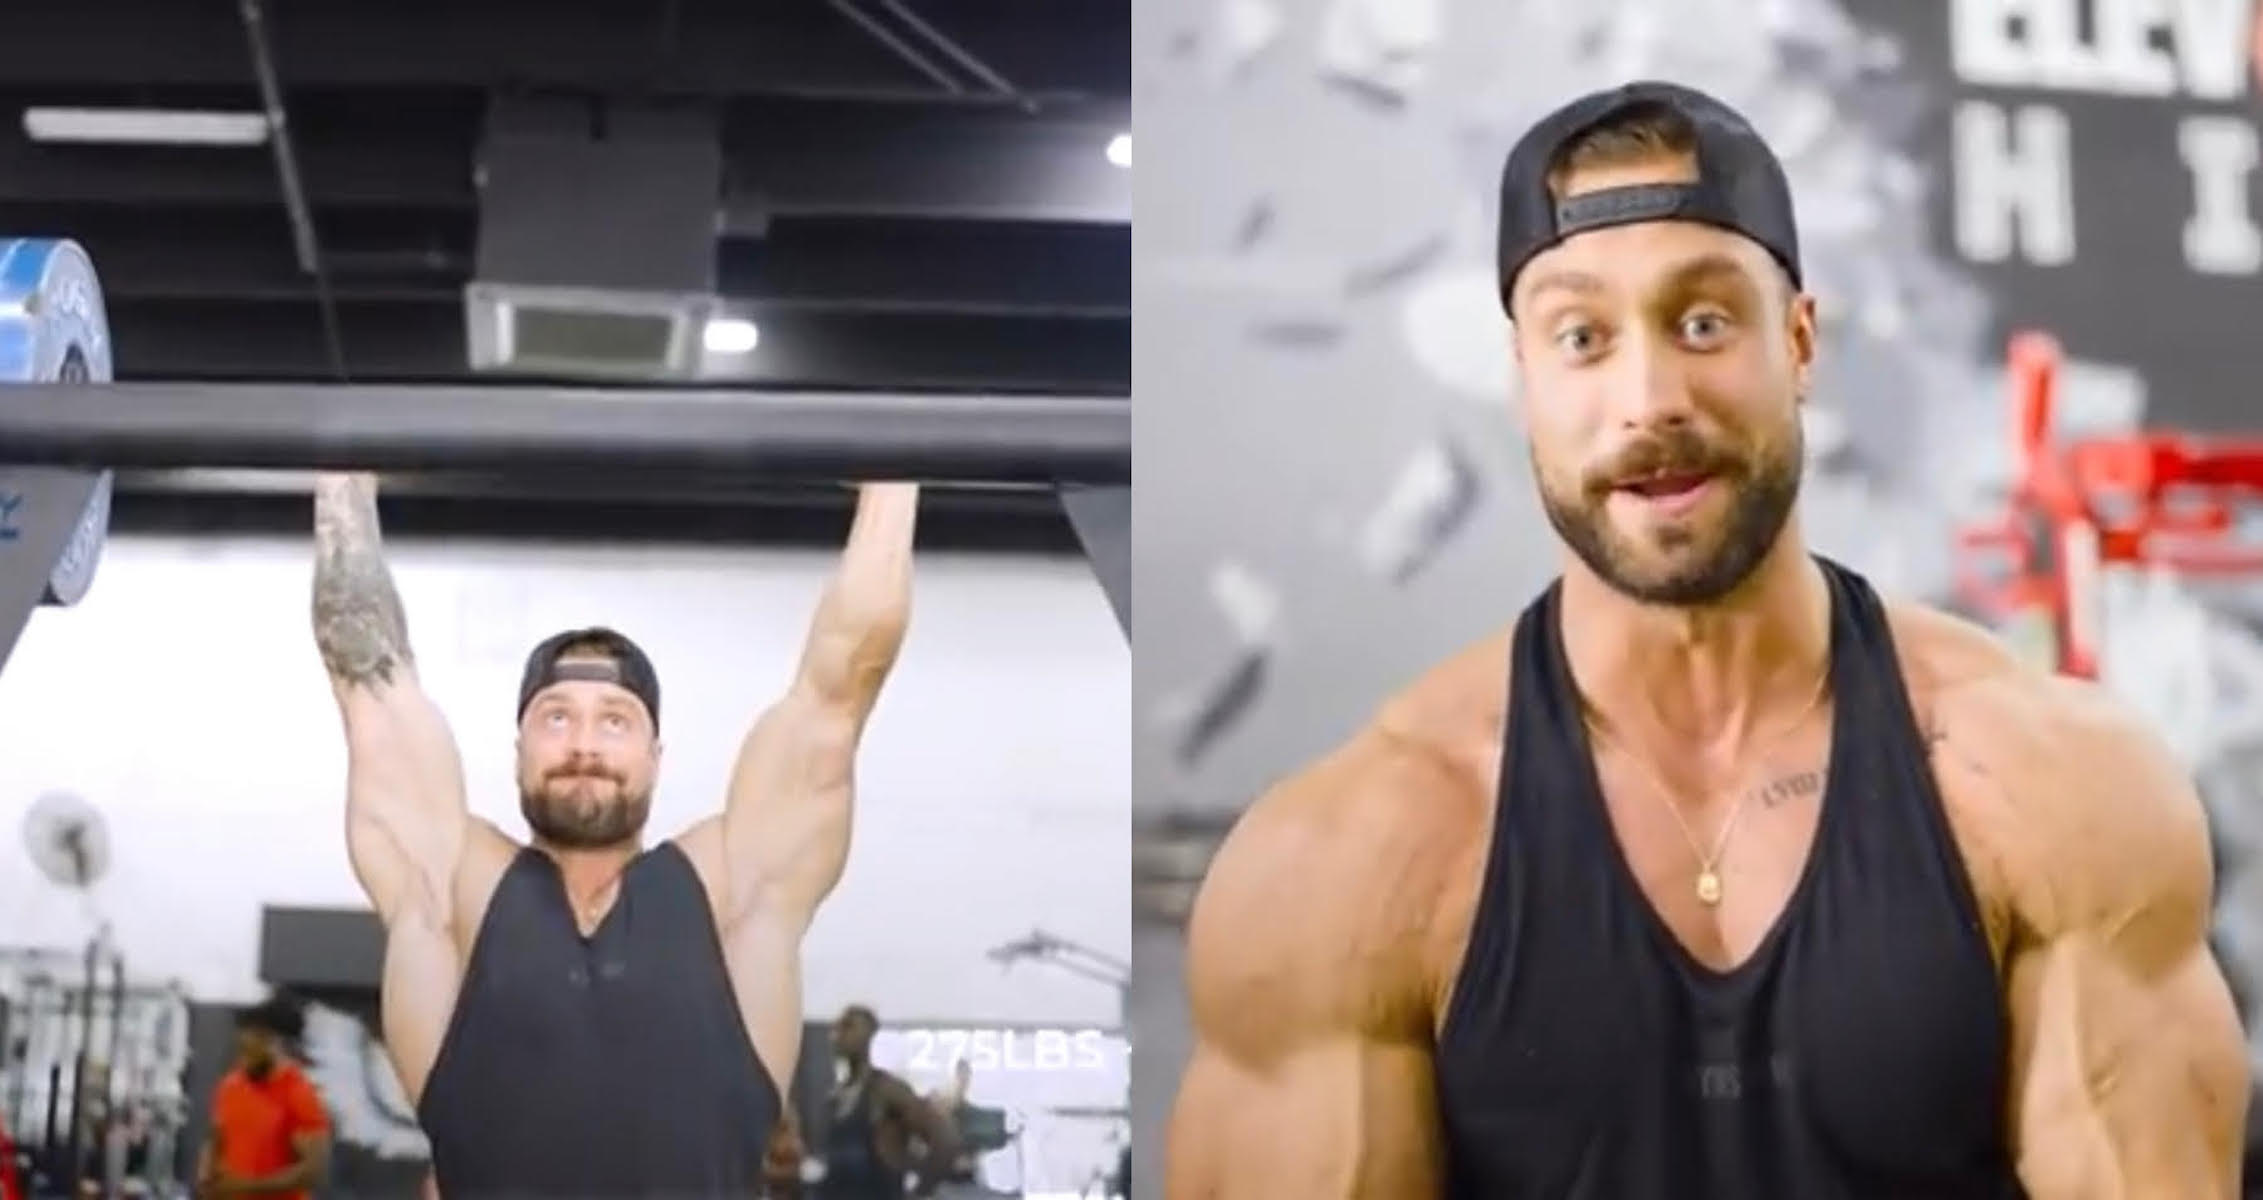 Chris Bumstead Wins Gymshark’s “STRENGTH TEST” Against Other Elite Athletes